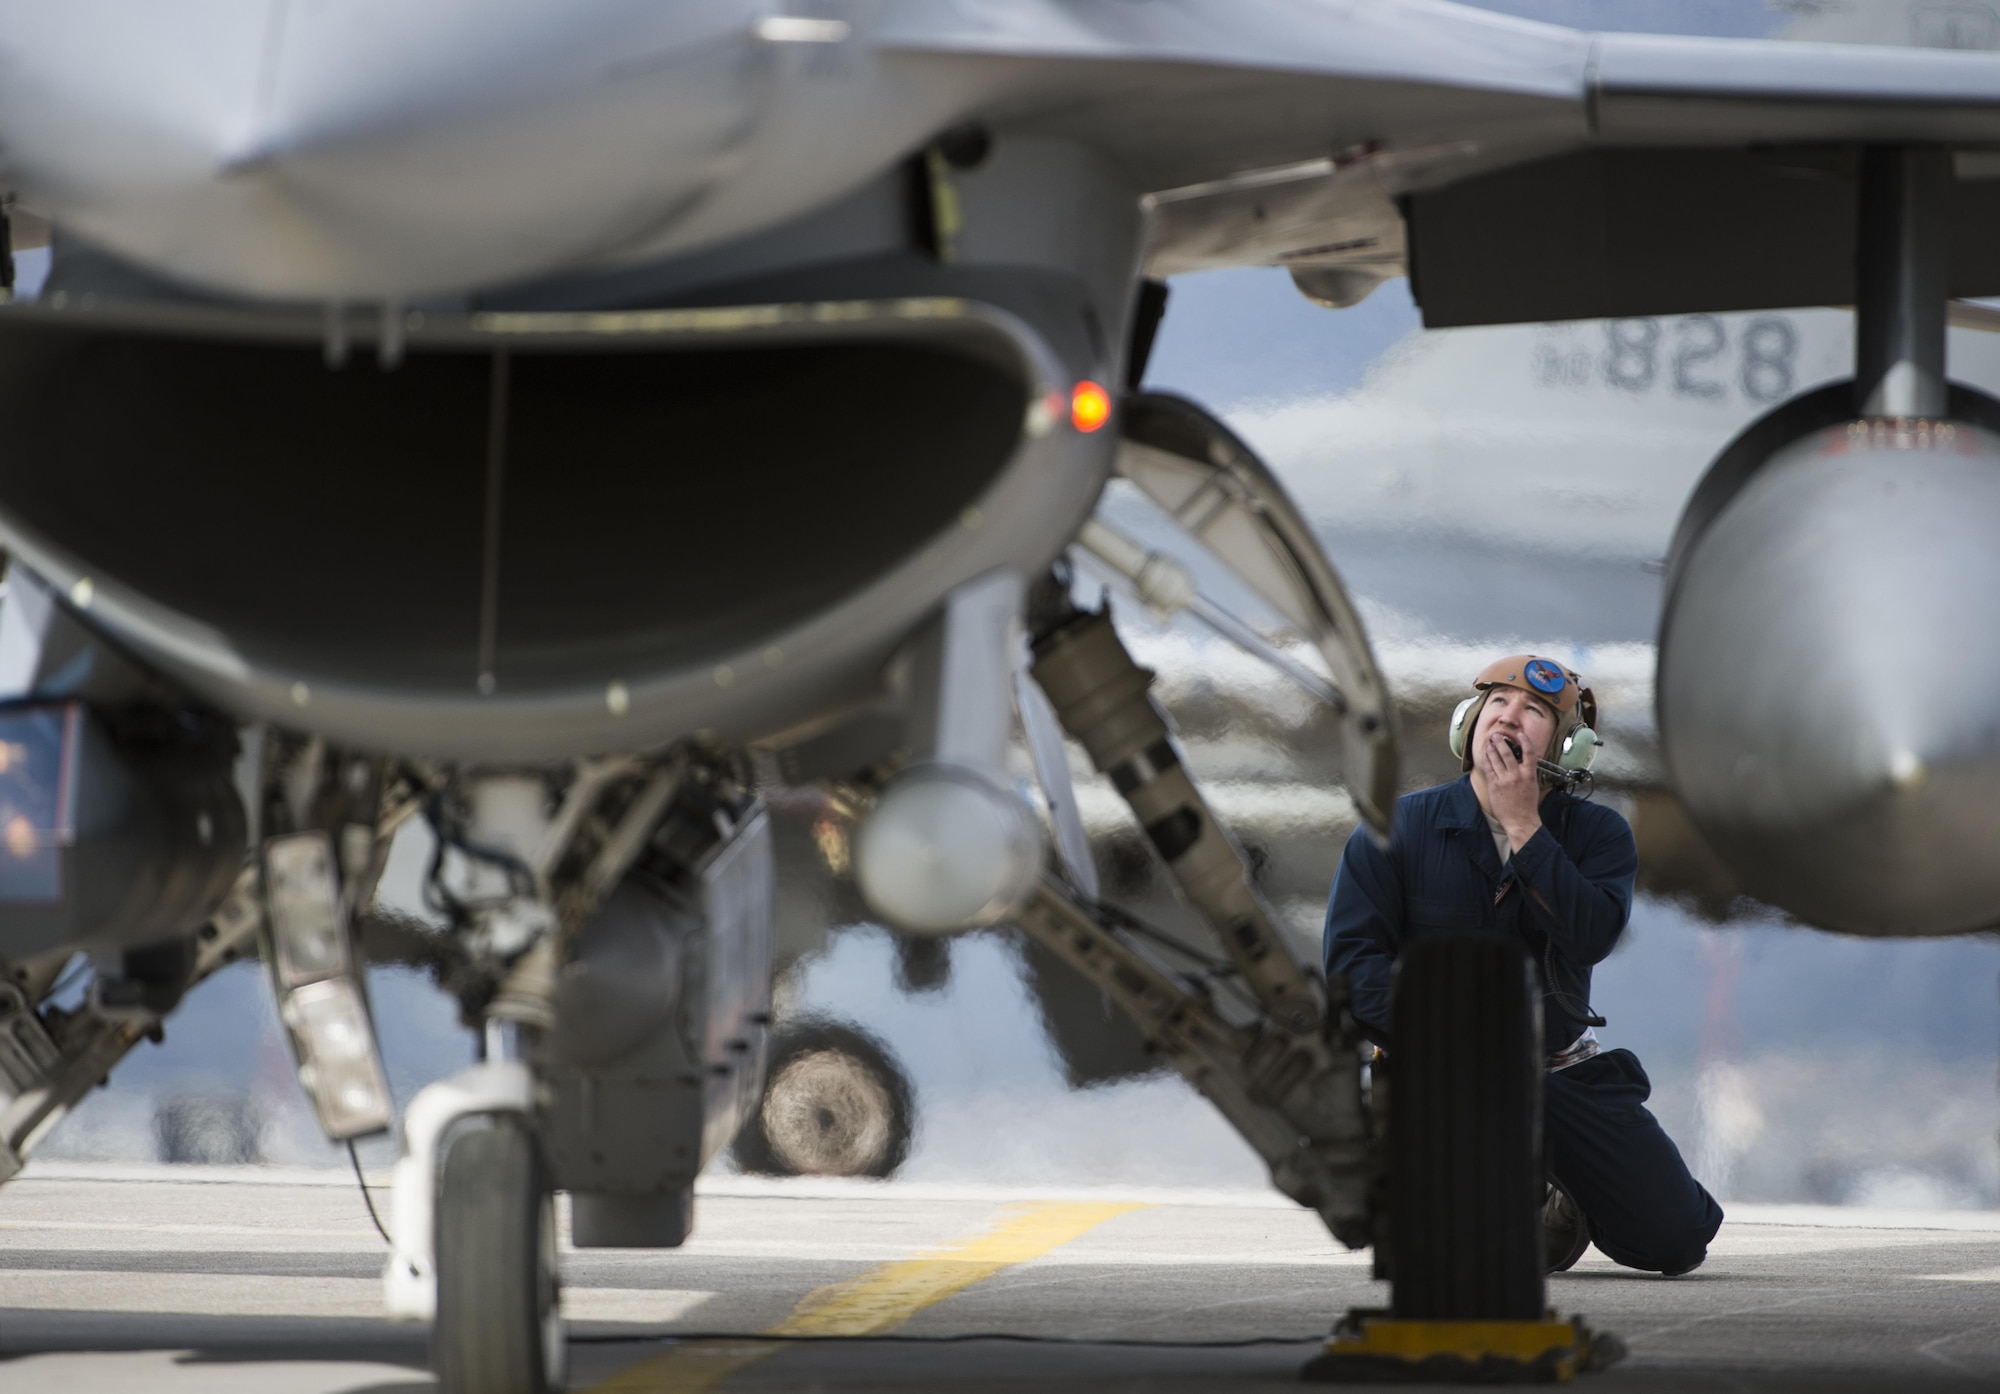 Staff Sgt. Ryan Anderson, a crew chief assigned to the 480th Expeditionary Fighter Squadron, performs preflight checks while communicating with a F-16 Fighting Falcon pilot before departure from the flightline at Souda Bay, Greece, Jan. 27. 2016. Anderson, along with 300 personnel from Spangdahlem Air Base, Germany, were participating in the flying training deployment between the Hellenic and U.S. air forces at Souda Bay from Jan. 22 to Feb. 15, 2016. (U.S. Air Force photo/Staff Sgt. Christopher Ruano)